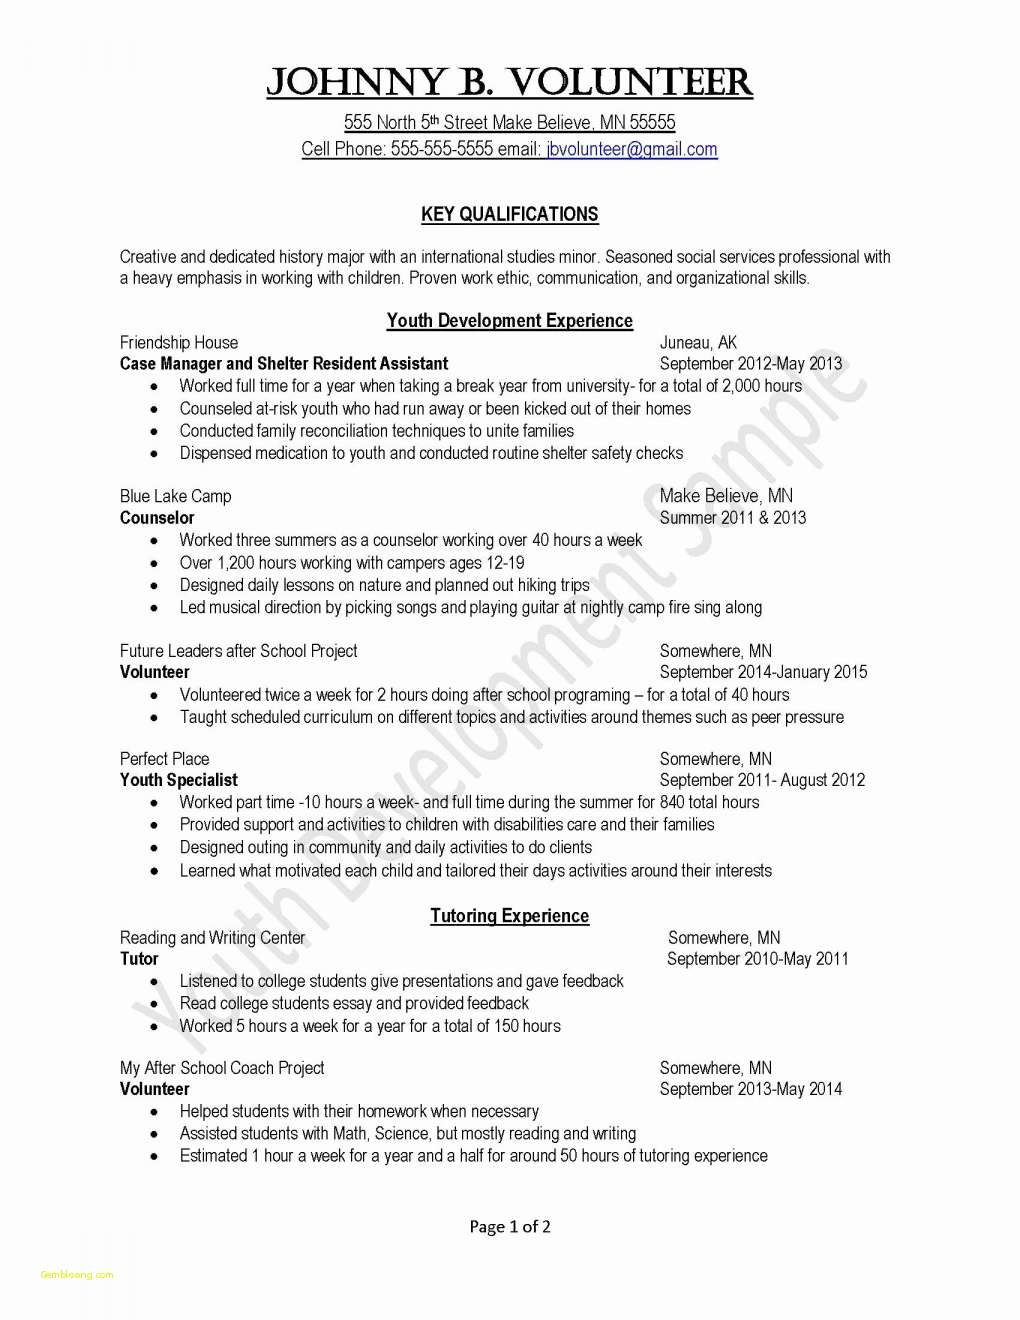 Resume Cover Letter Template Pdf - Free Resume Templates for Students Takenosumi